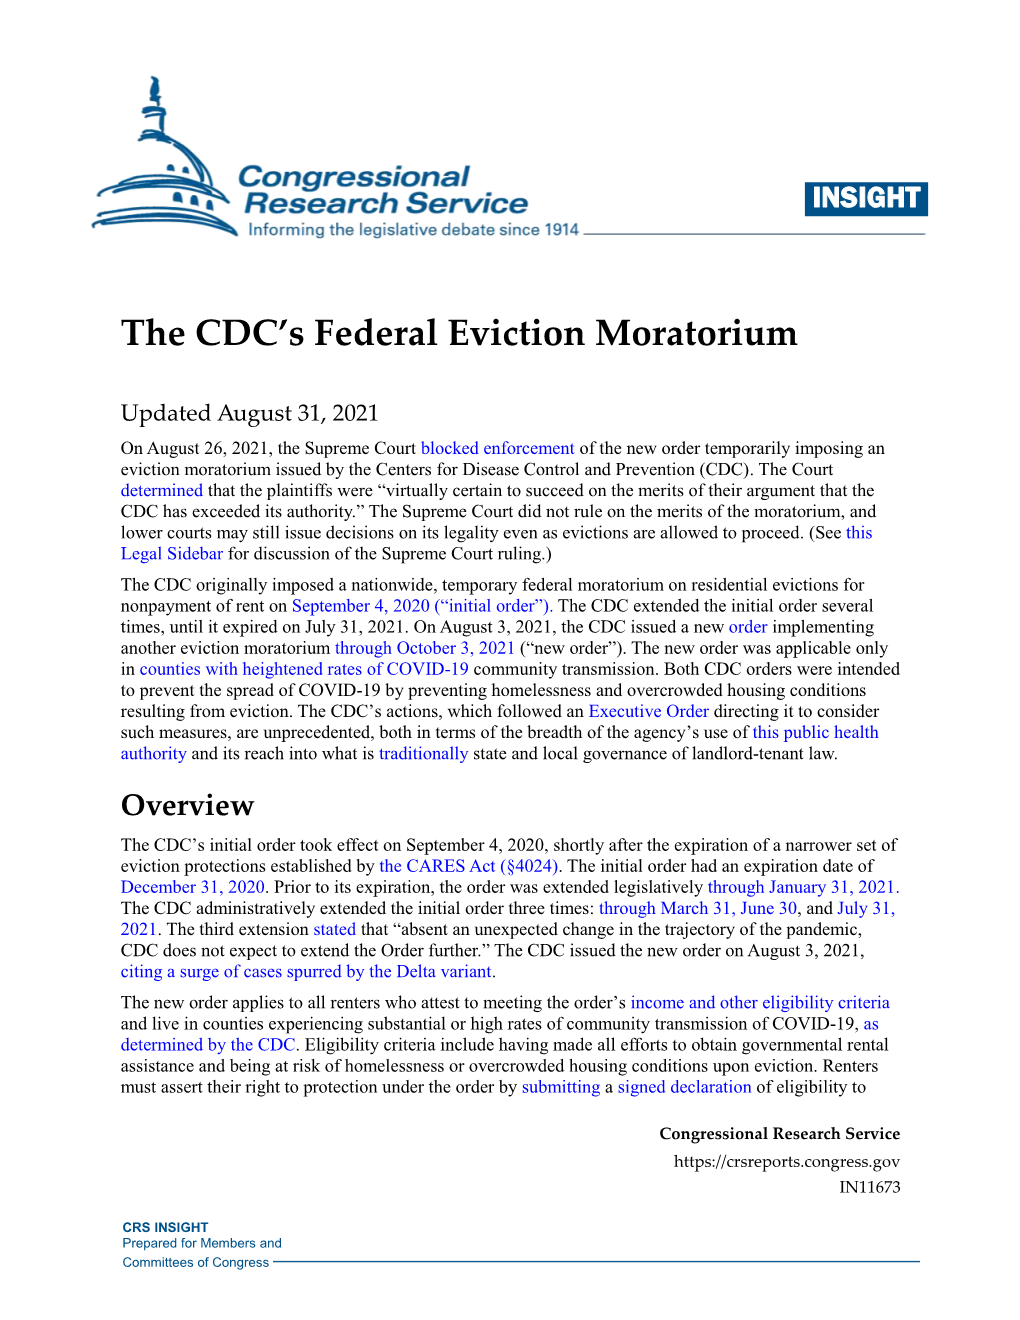 The CDC's Federal Eviction Moratorium